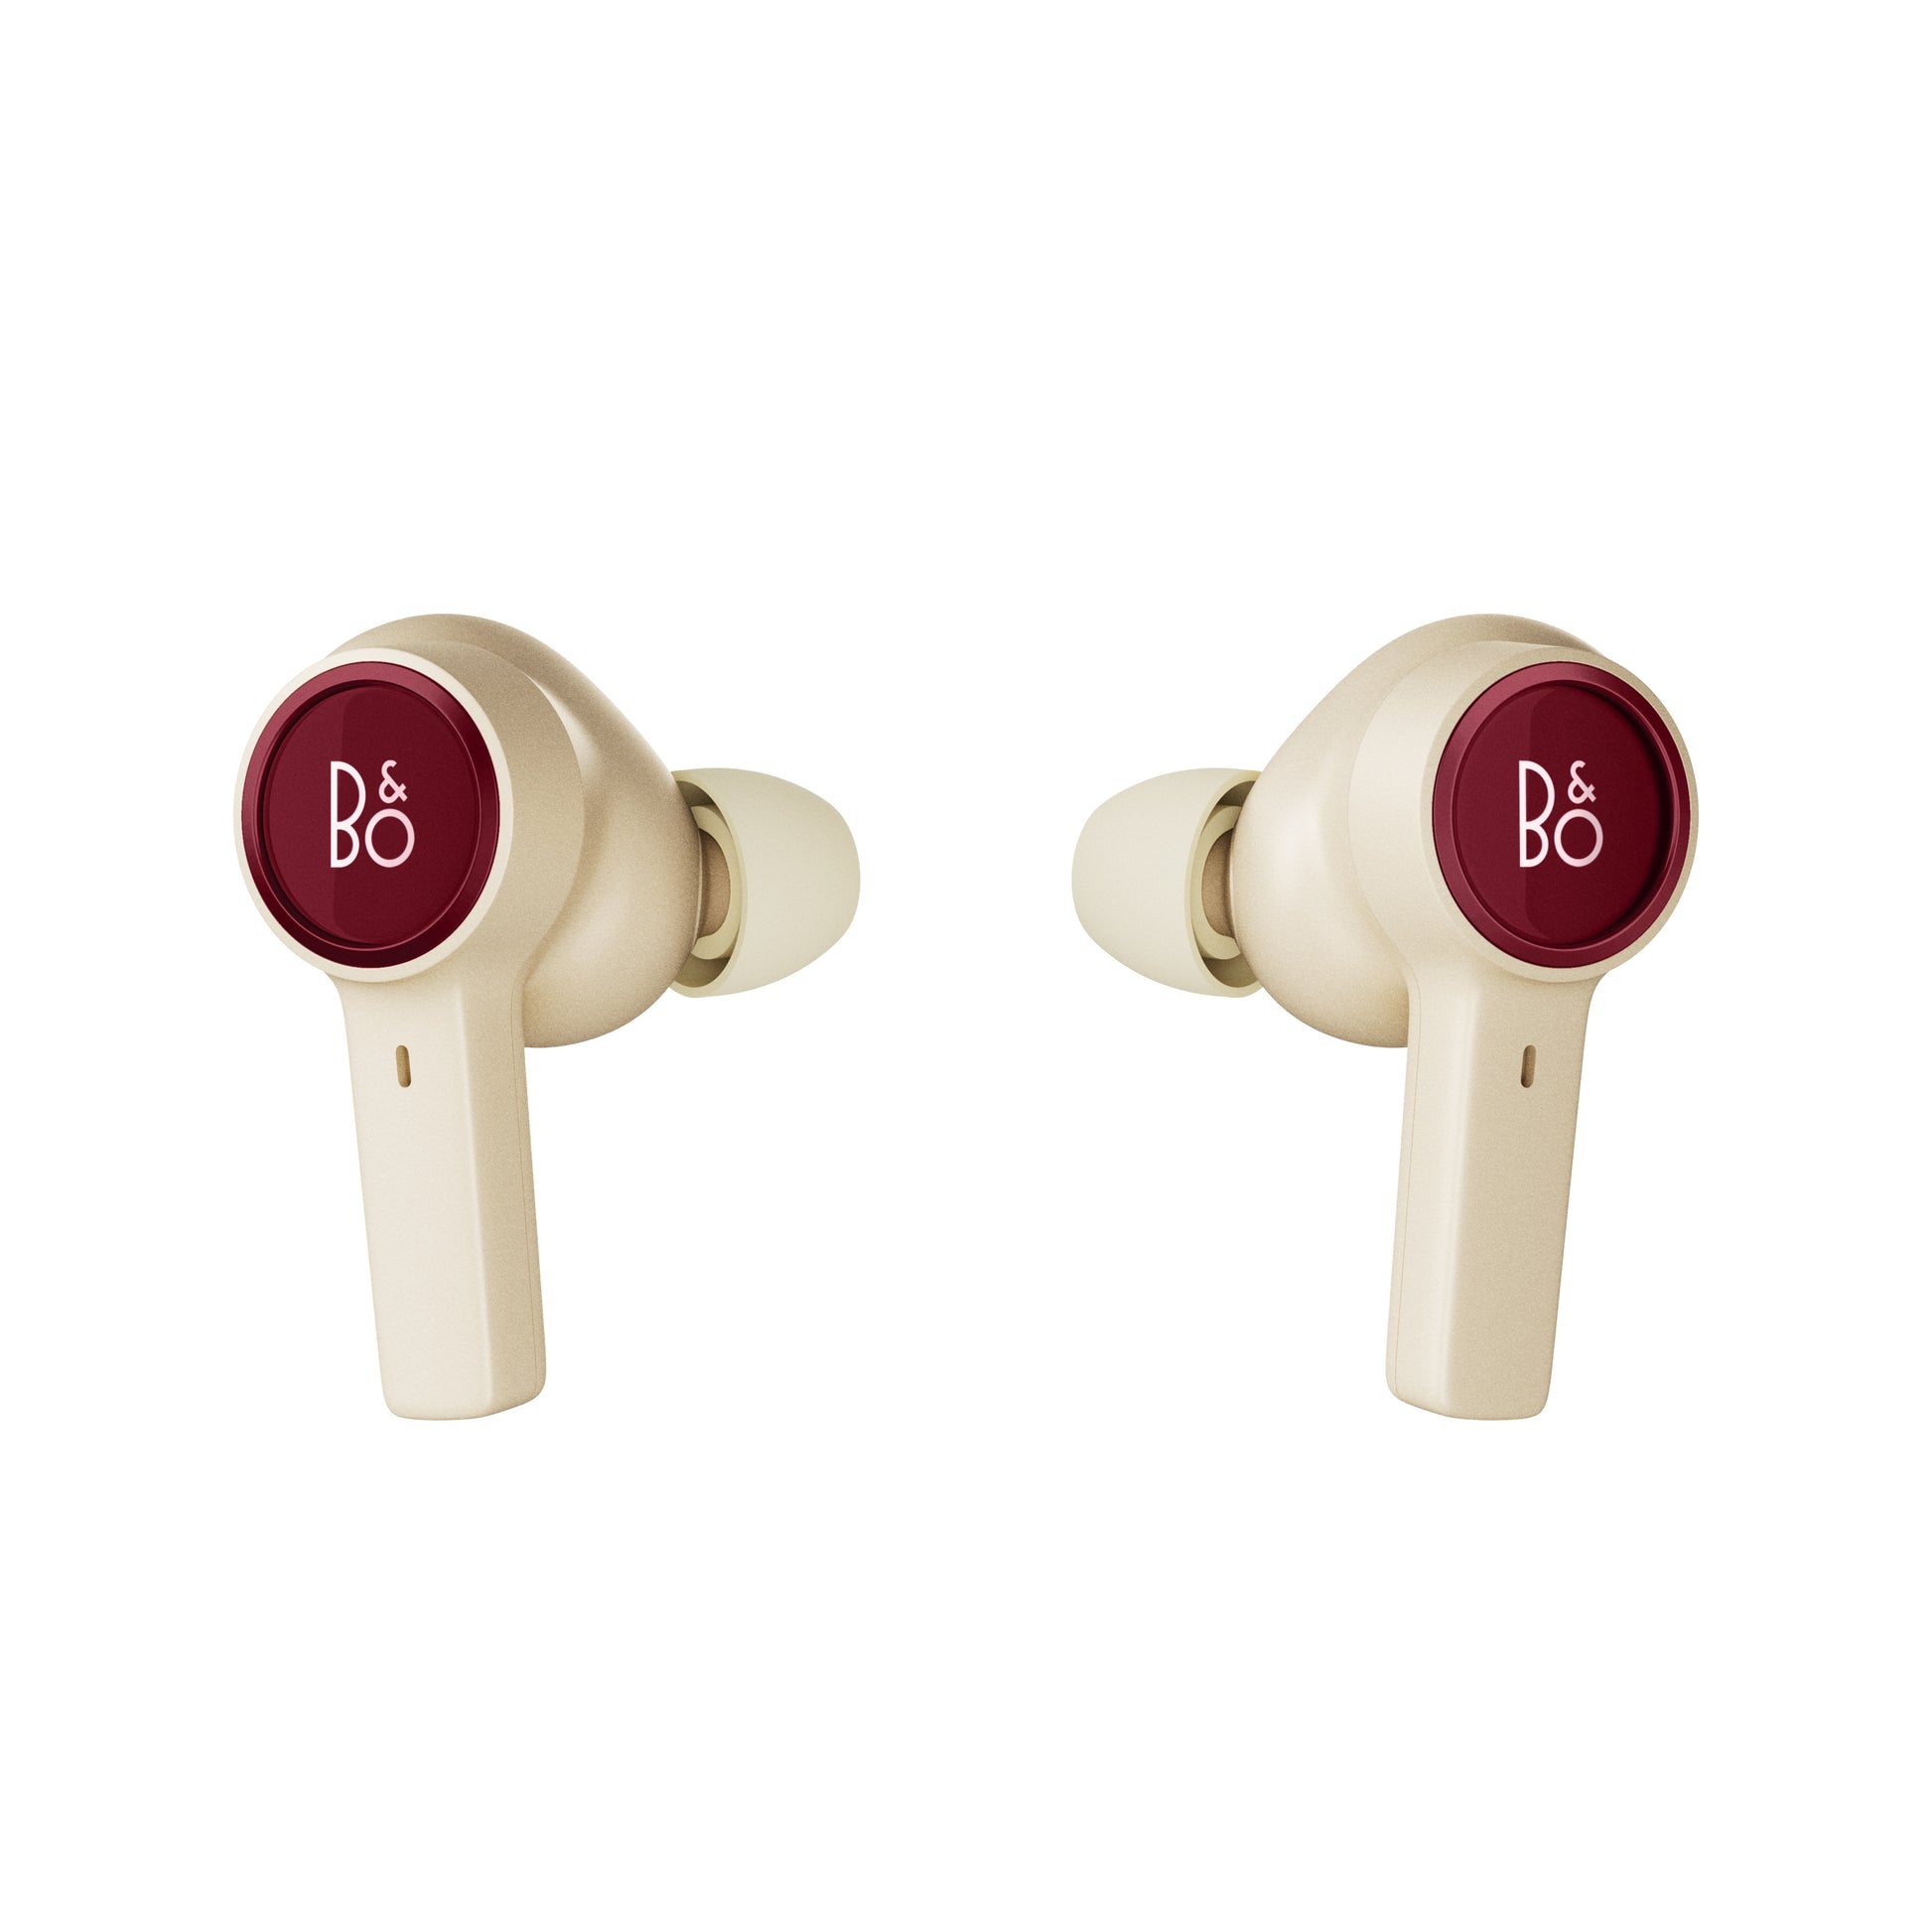 Bang & Olufsen Beoplay EX - Wireless Bluetooth Earphones with Microphone  and Active Noise Cancelling, Waterproof, 20 Hours of Playtime